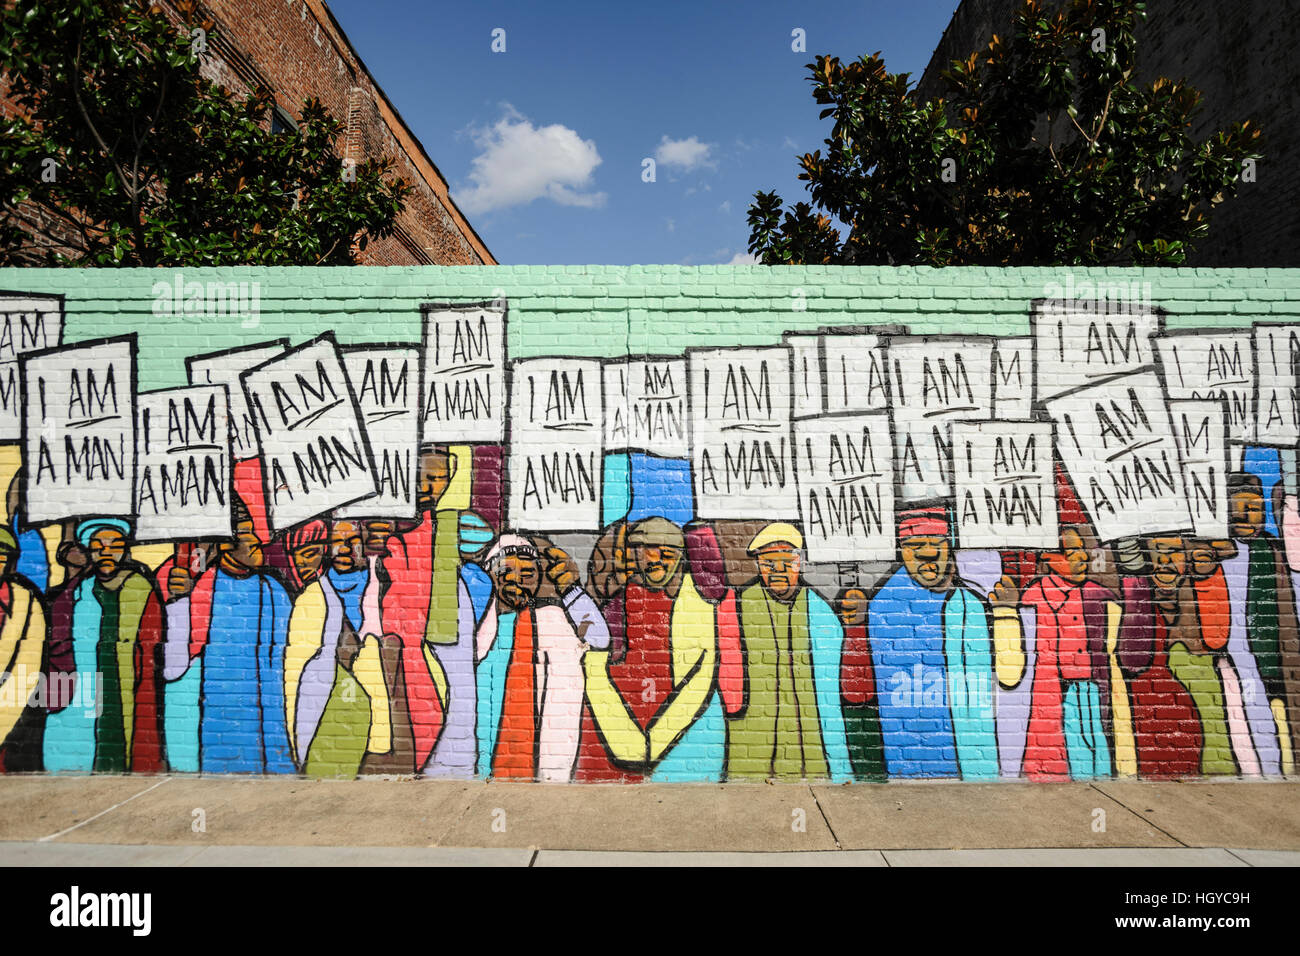 Mural painting depicting civil rights protesters, Memphis, Tennessee, USA Stock Photo